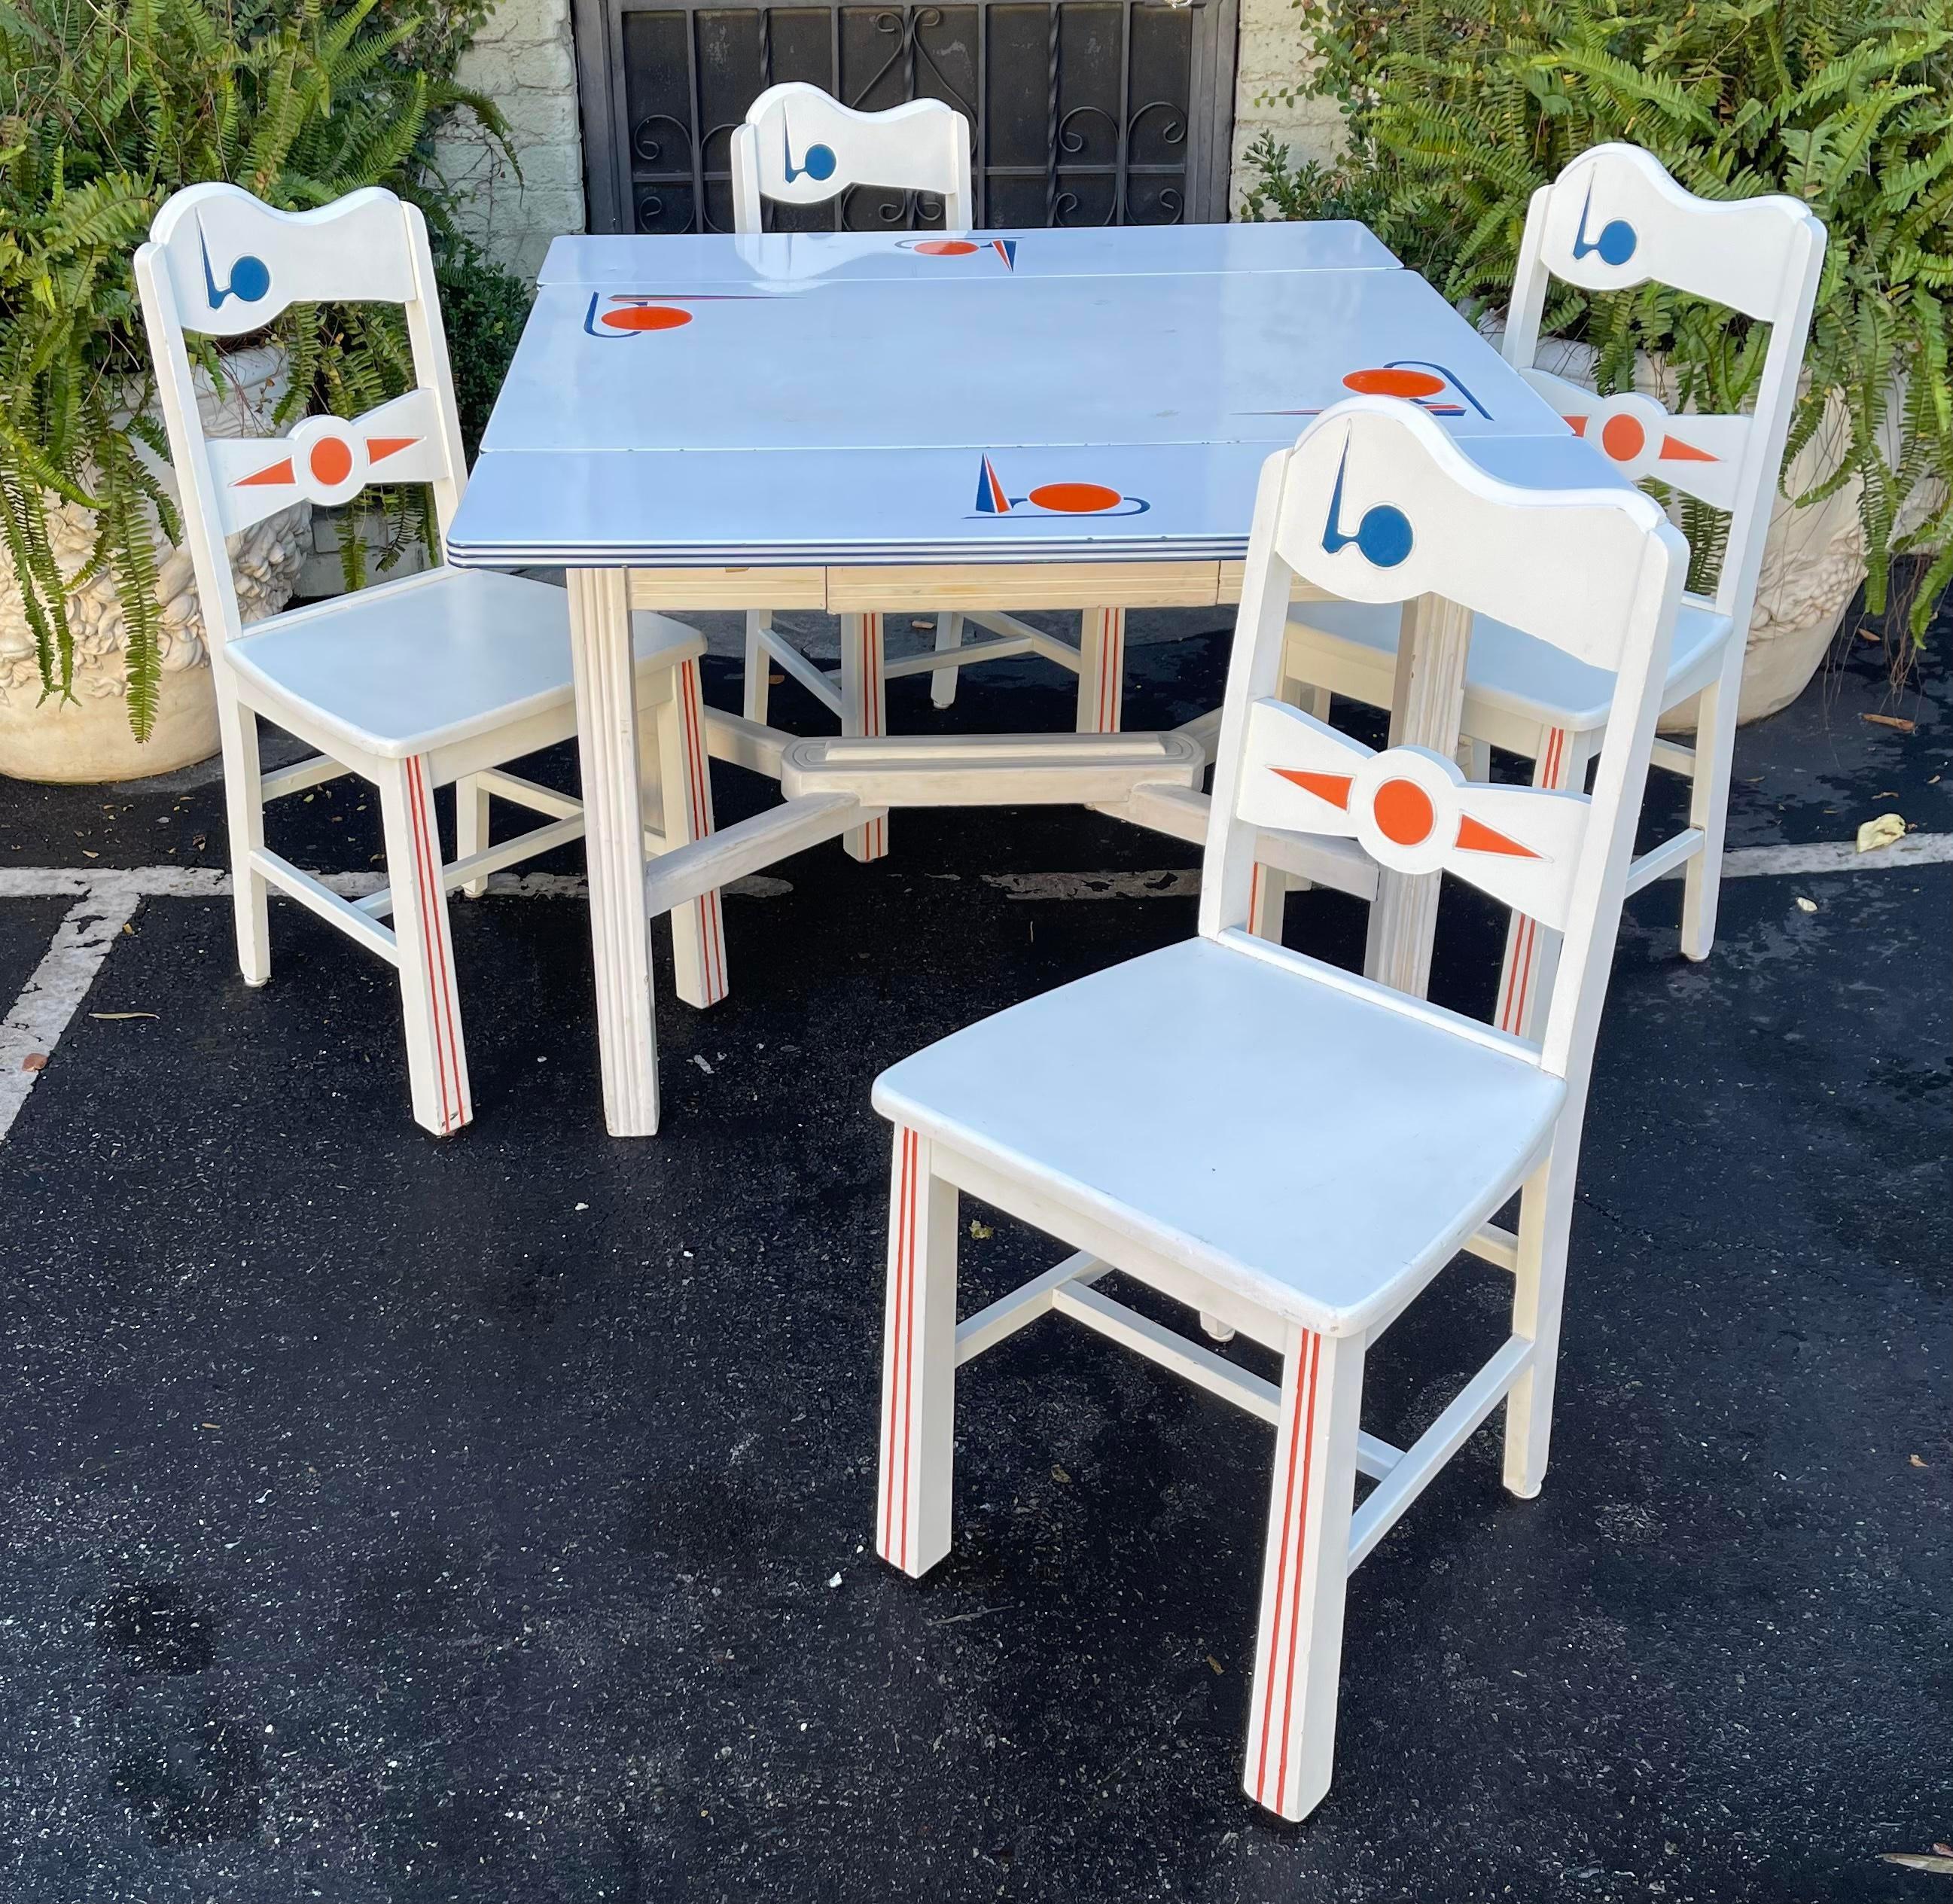 Antique 1939 World's Fair Enamel top kitchen dining table & chairs set.